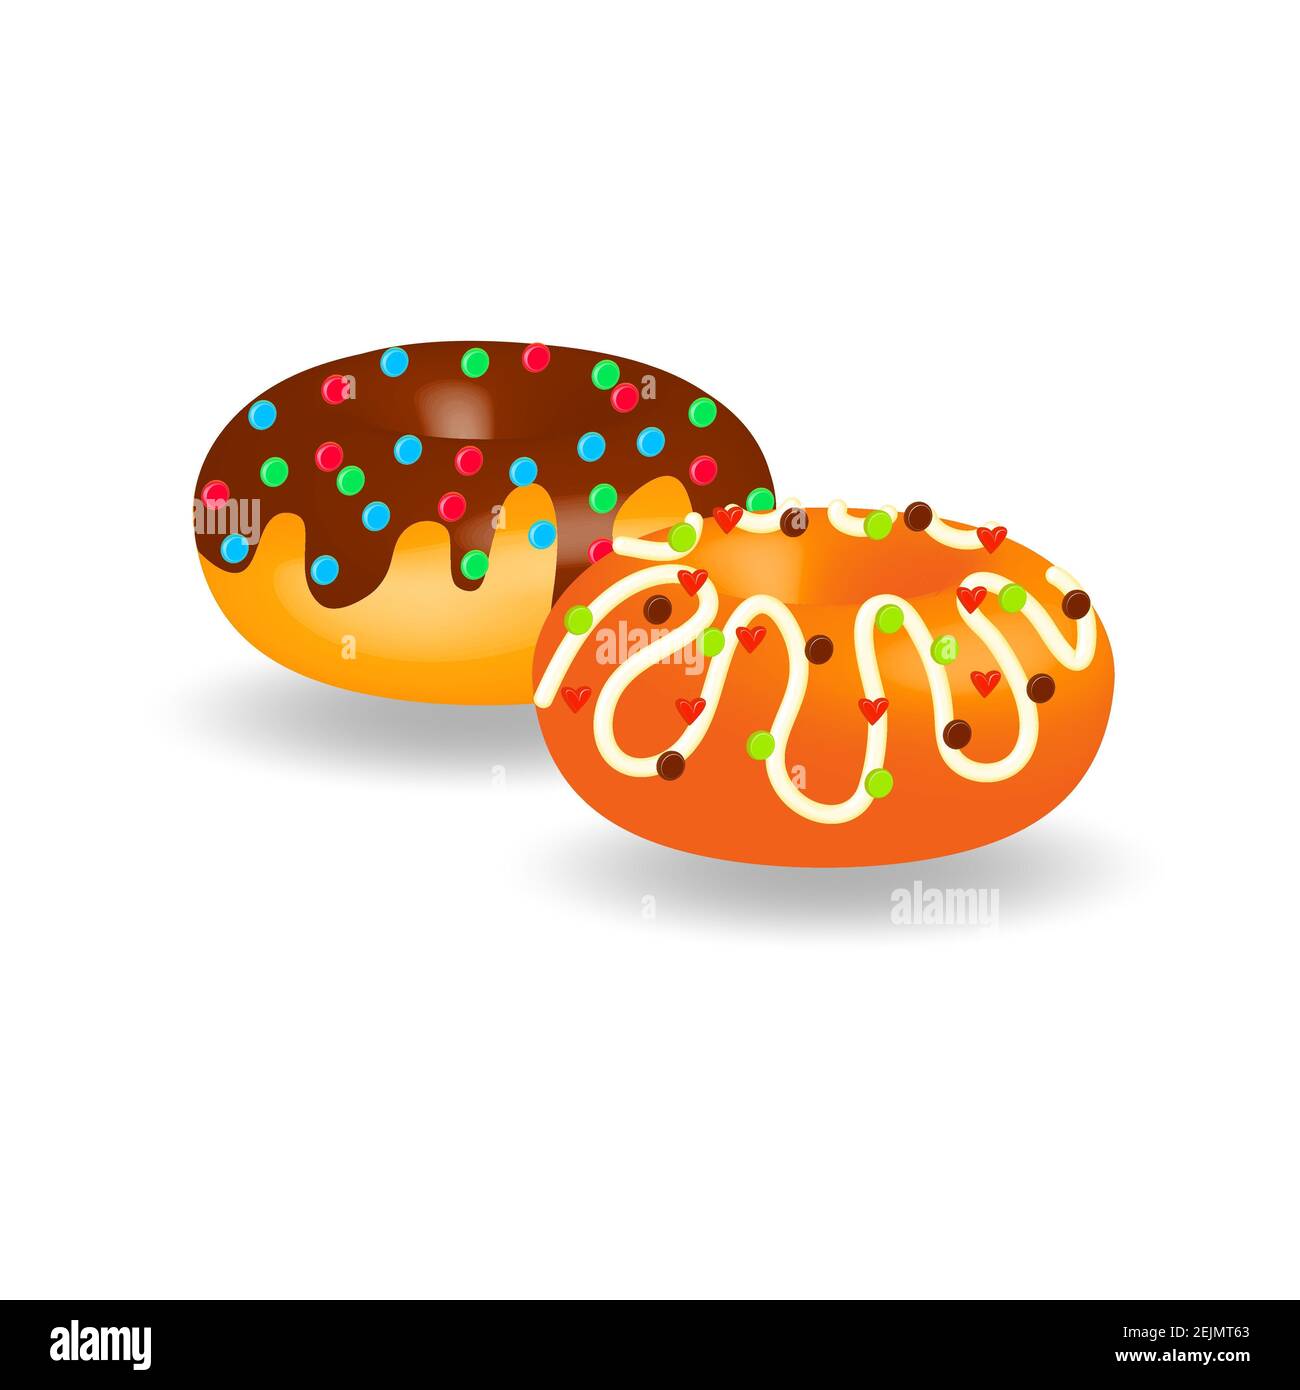 Appetizing sweet colorful donuts isolated on white background close-up. Realistic 3d illustration of donuts with chocolate and white icing. For advert Stock Photo